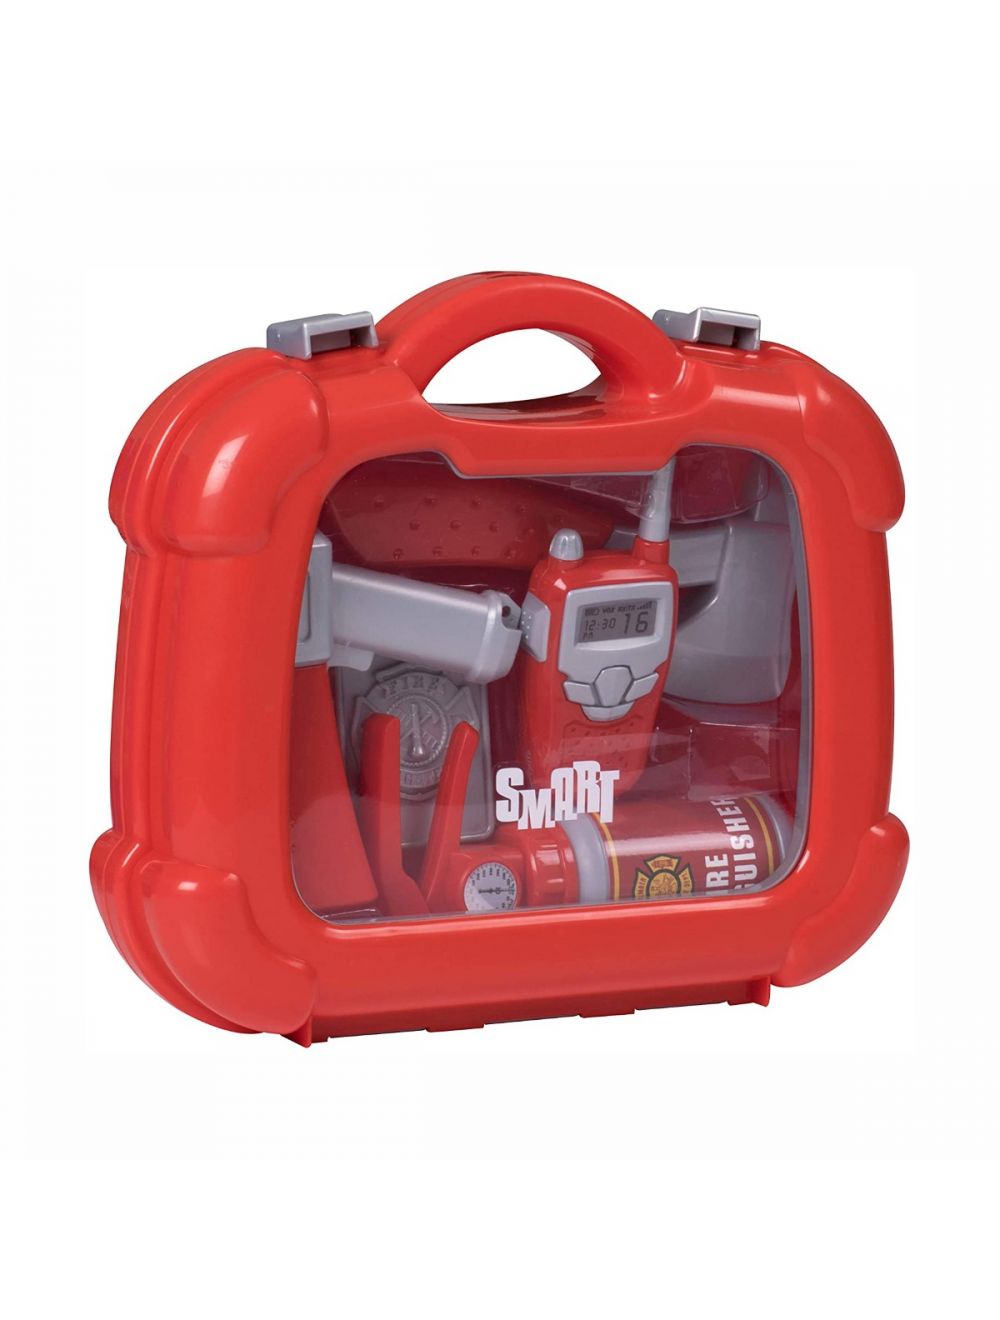 Smart Fire Rescue Case With Accessories Boys/Girls Fireman Case Set Toy 